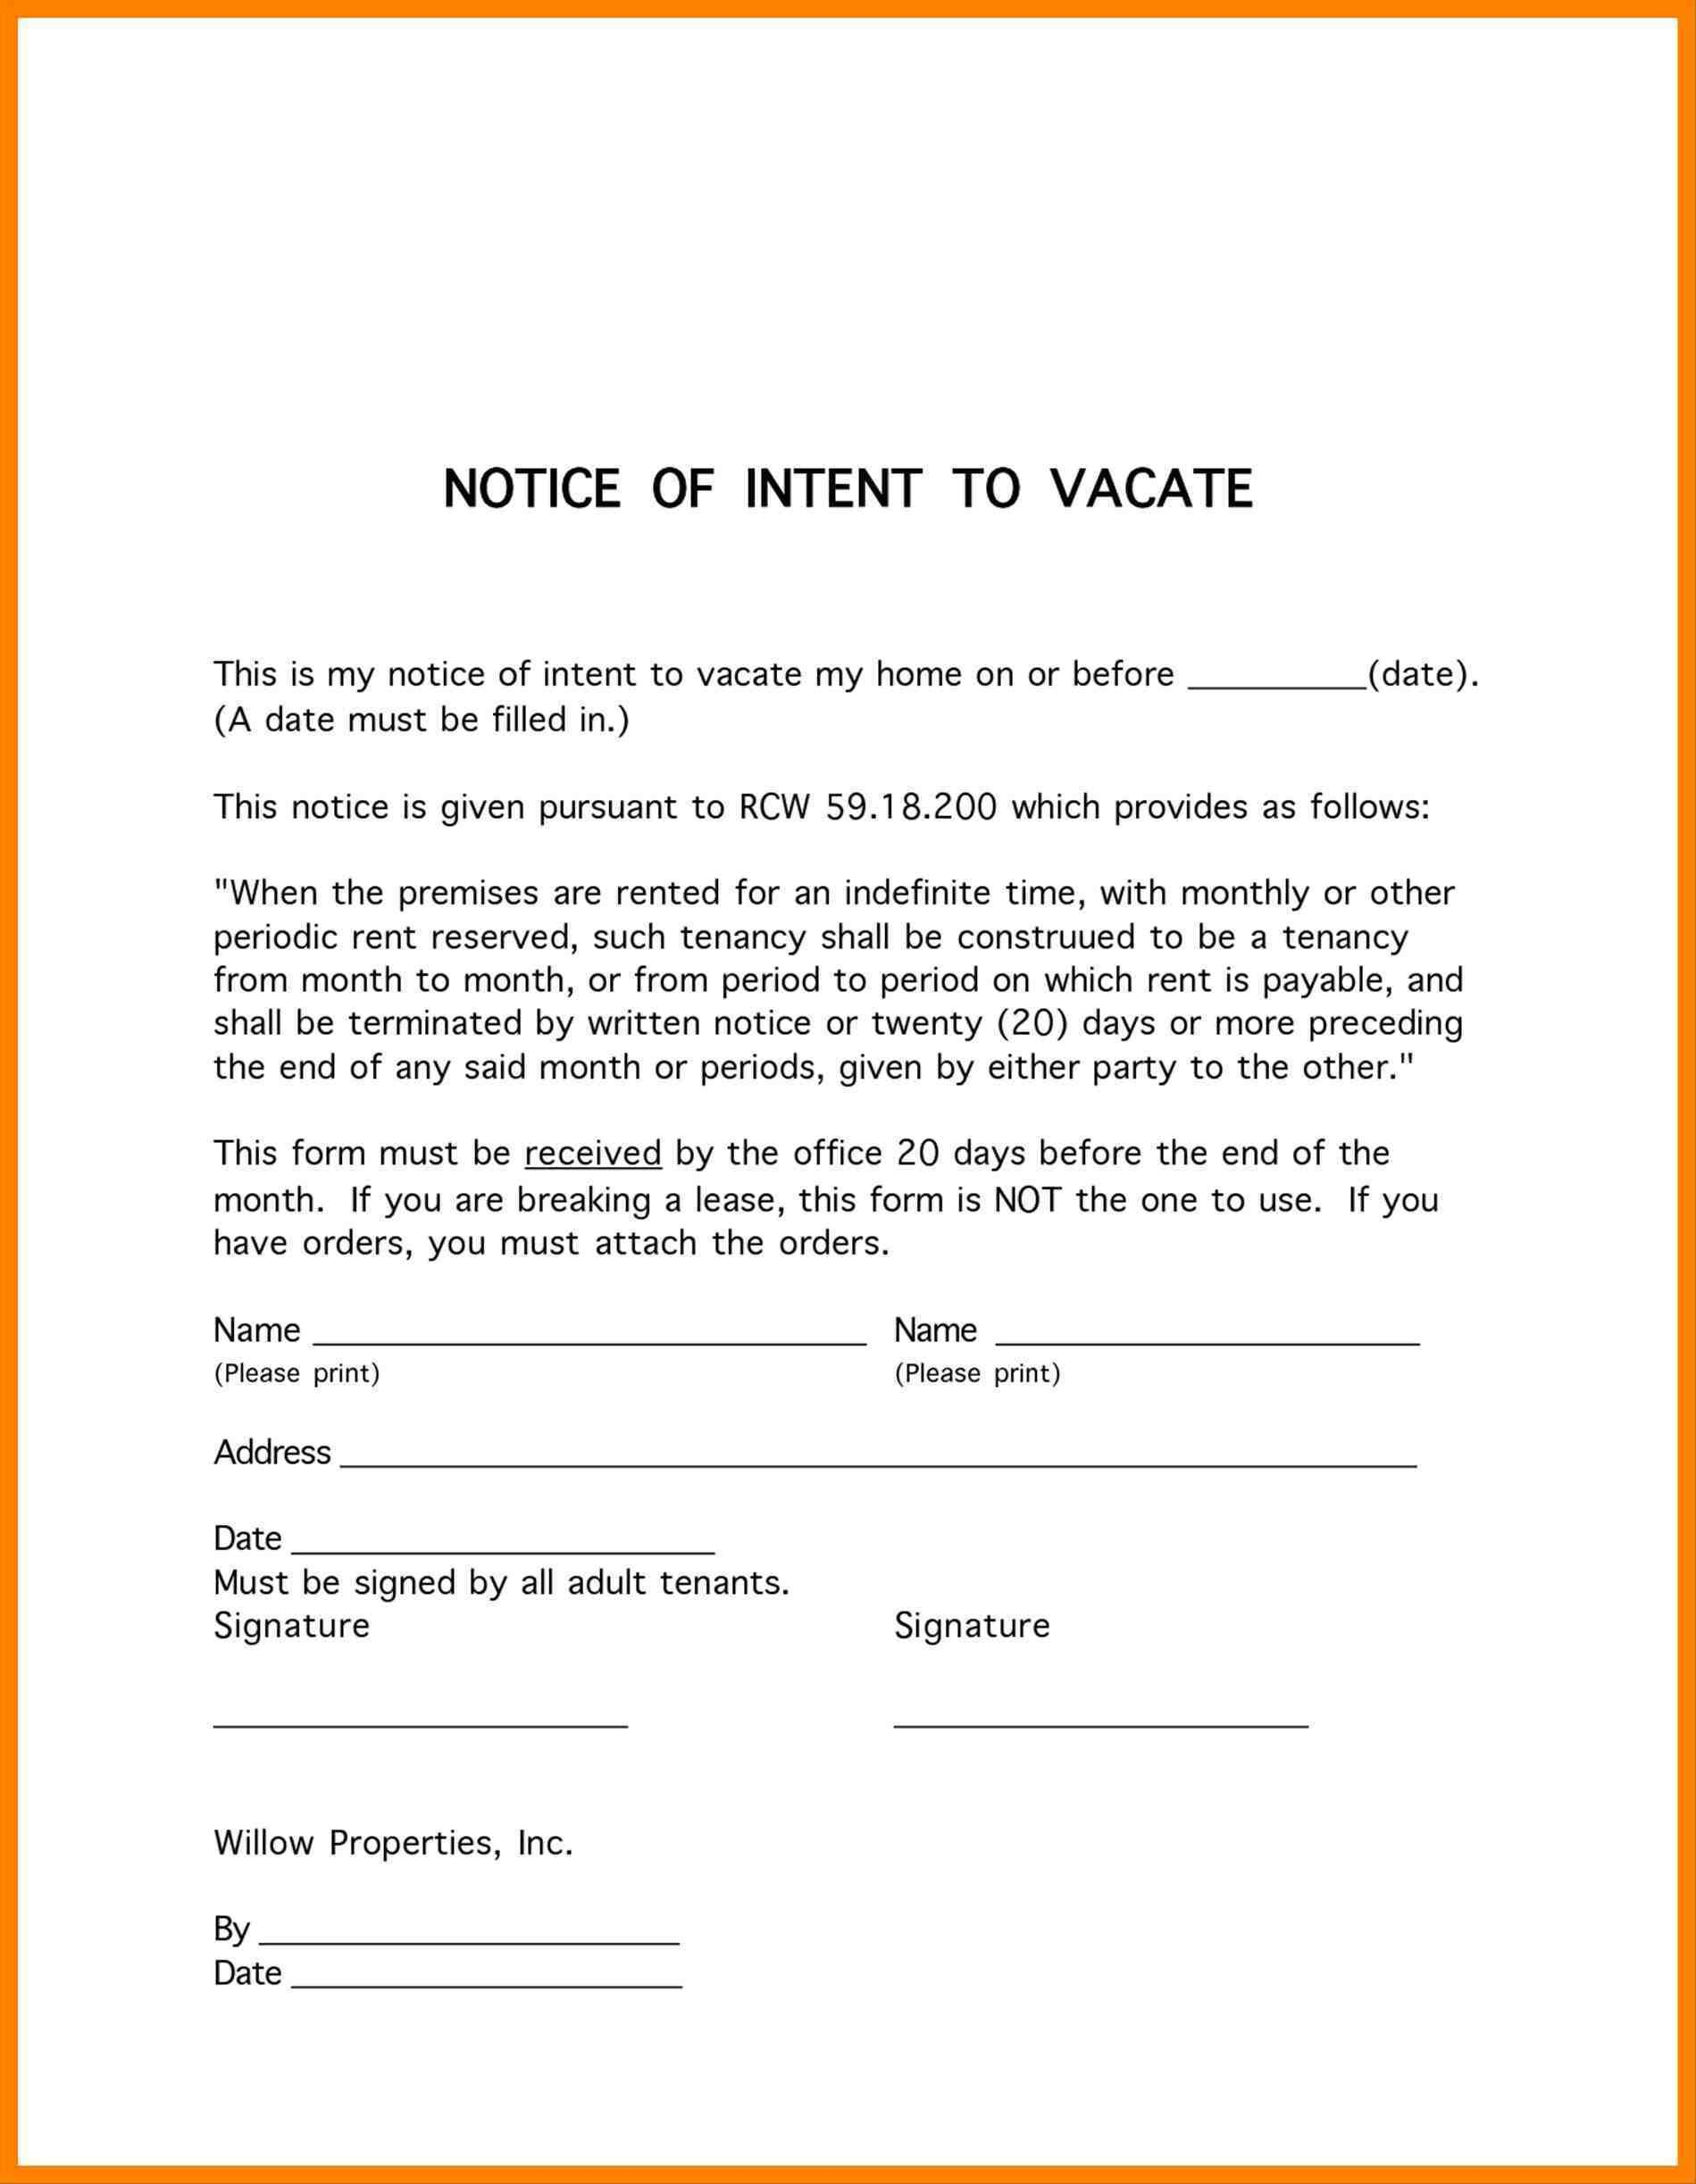 Notice Of Intent to Vacate Letter Template - Final Notice before Legal Best Collections Notice Template Photos Of